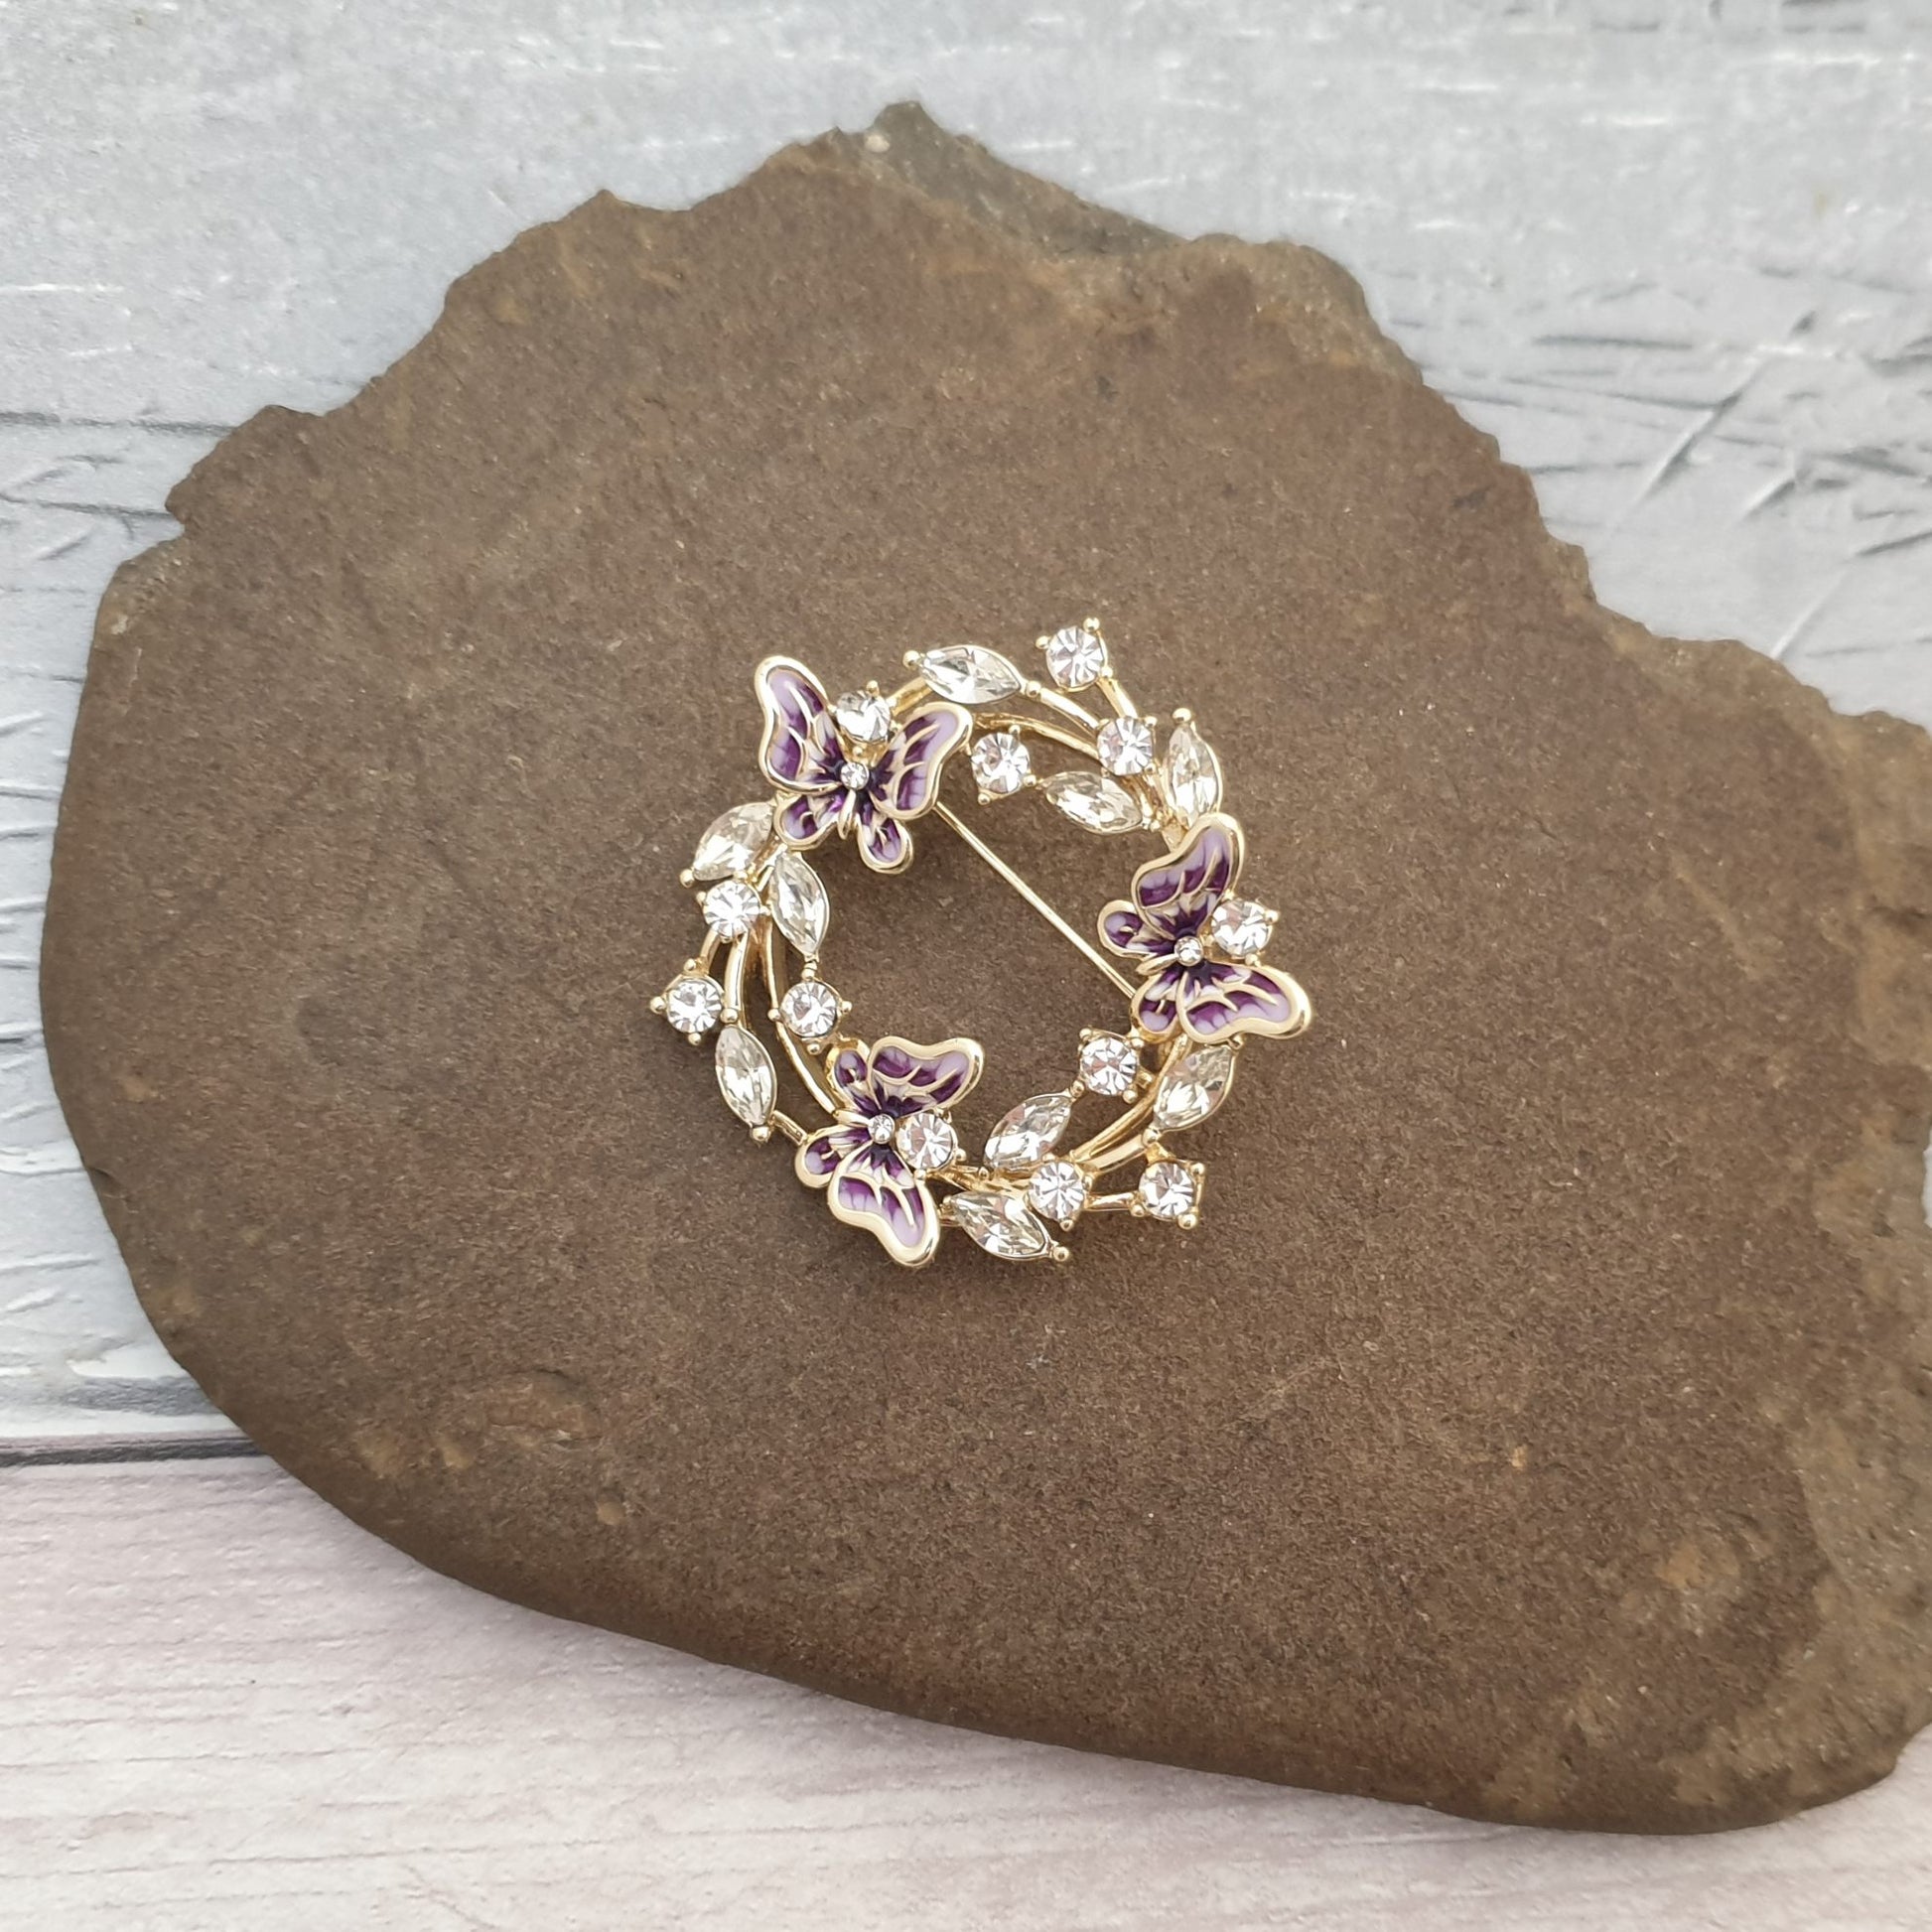 Golden mounted Brooch of Purple Butterflies and diamante crystal leaves.